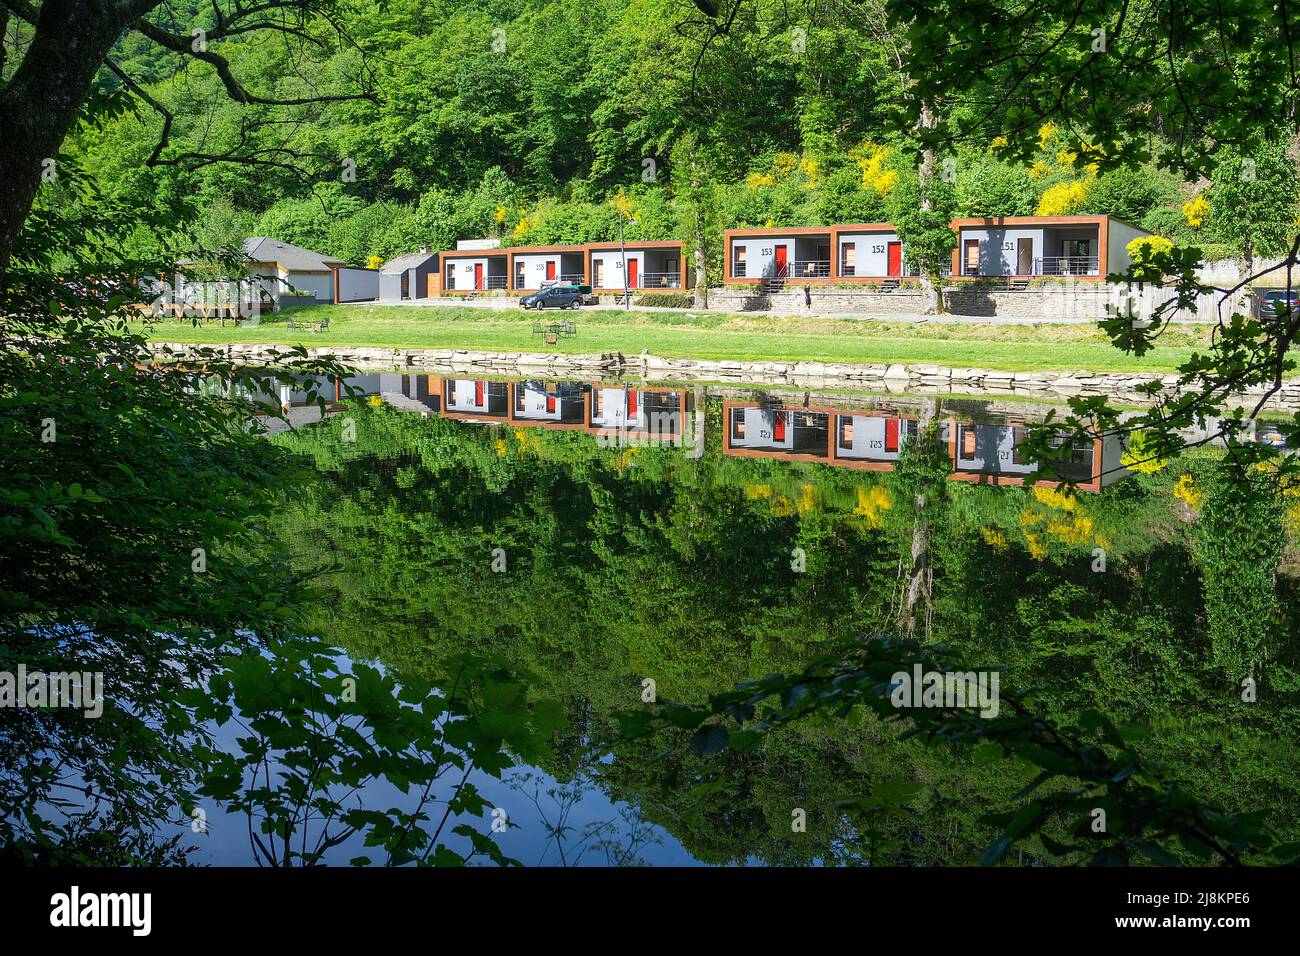 Water reflection of cottages at ithe river bank of Sure river, Cocoon Hotel la Rive, Bourscheid, Diekirch district, Ardennes, Luxembourg, Europe Stock Photo